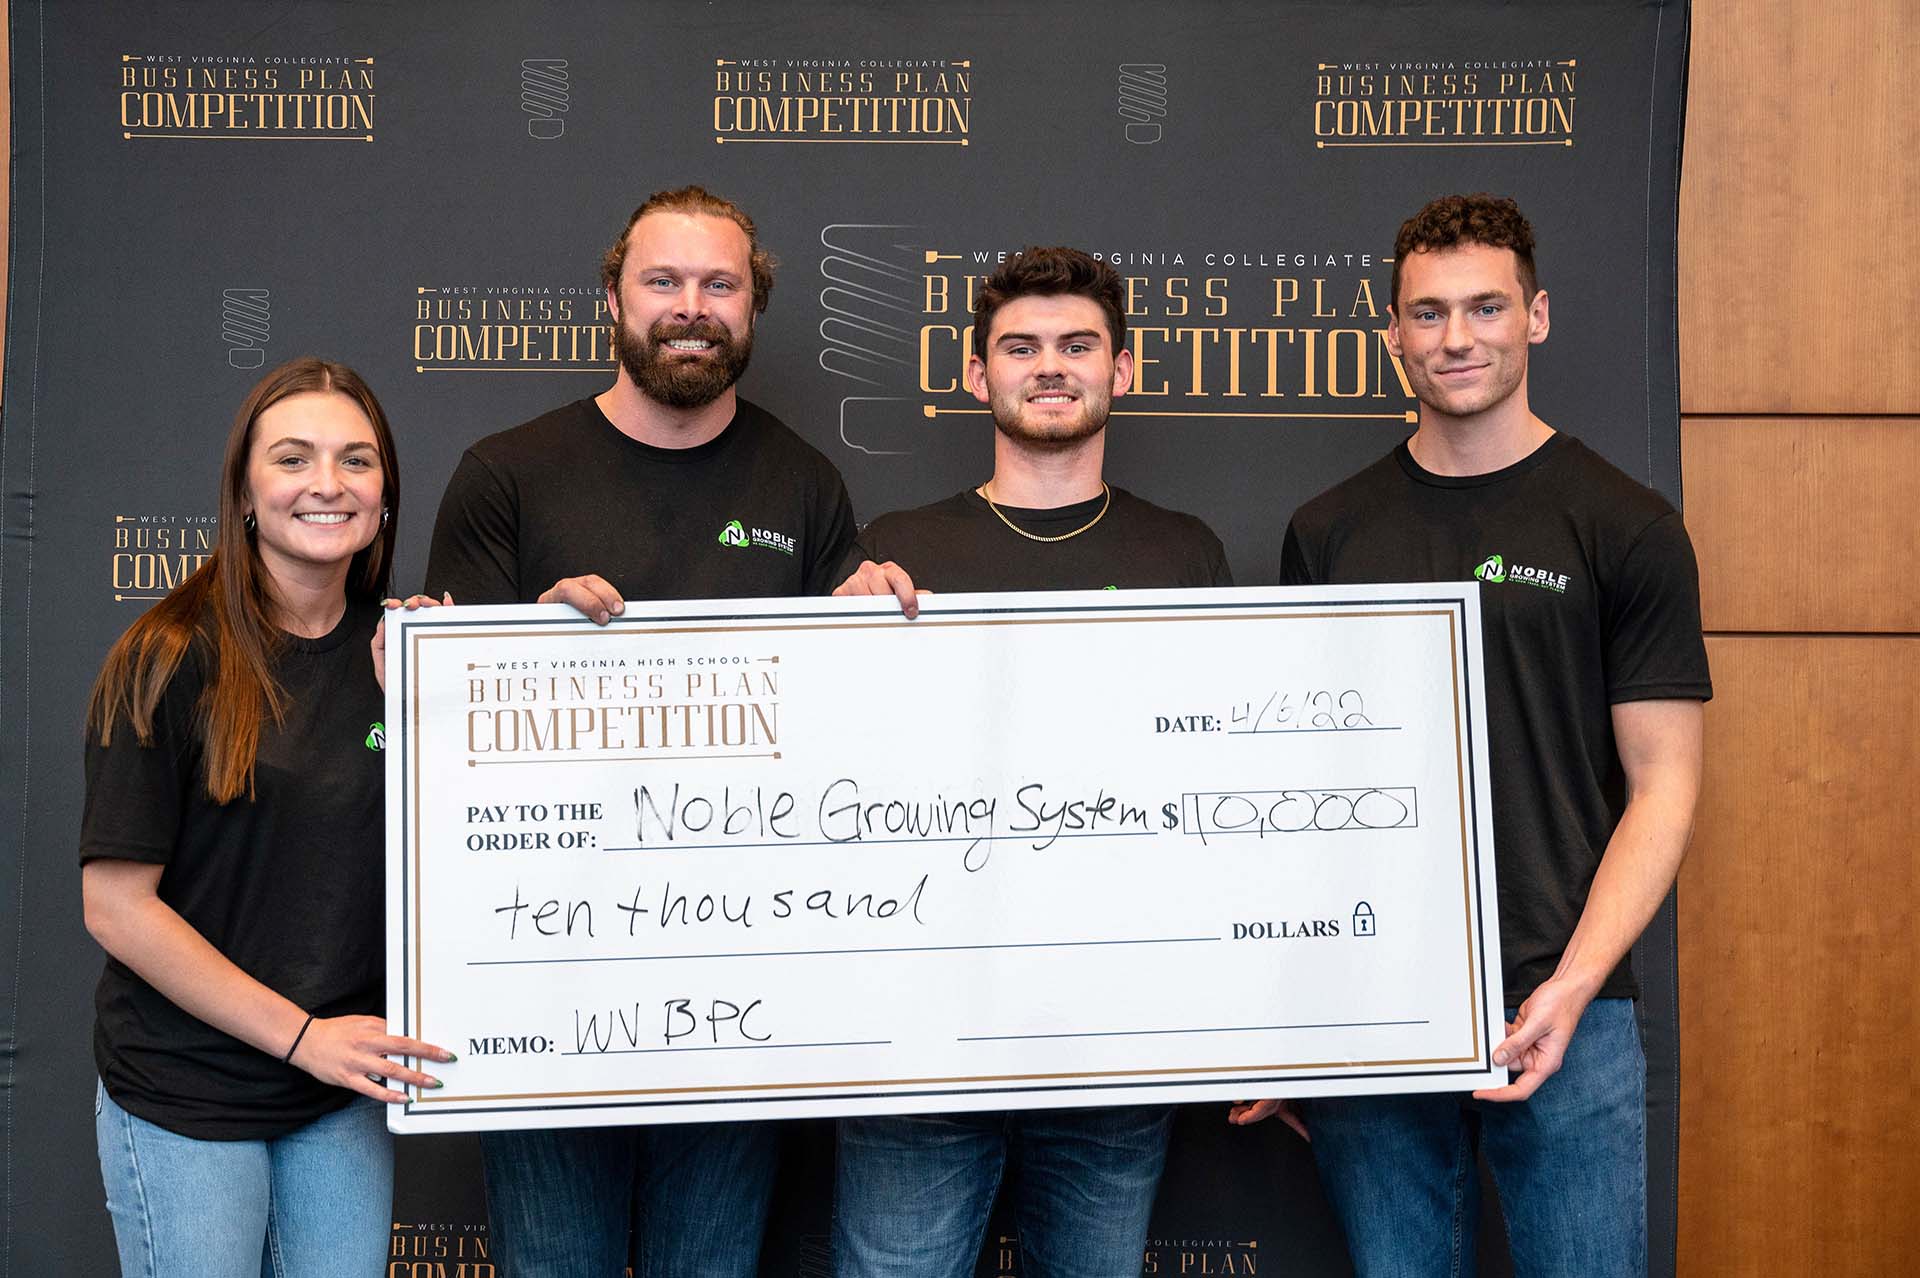 Four smiling people holding a large check in front of a backdrop